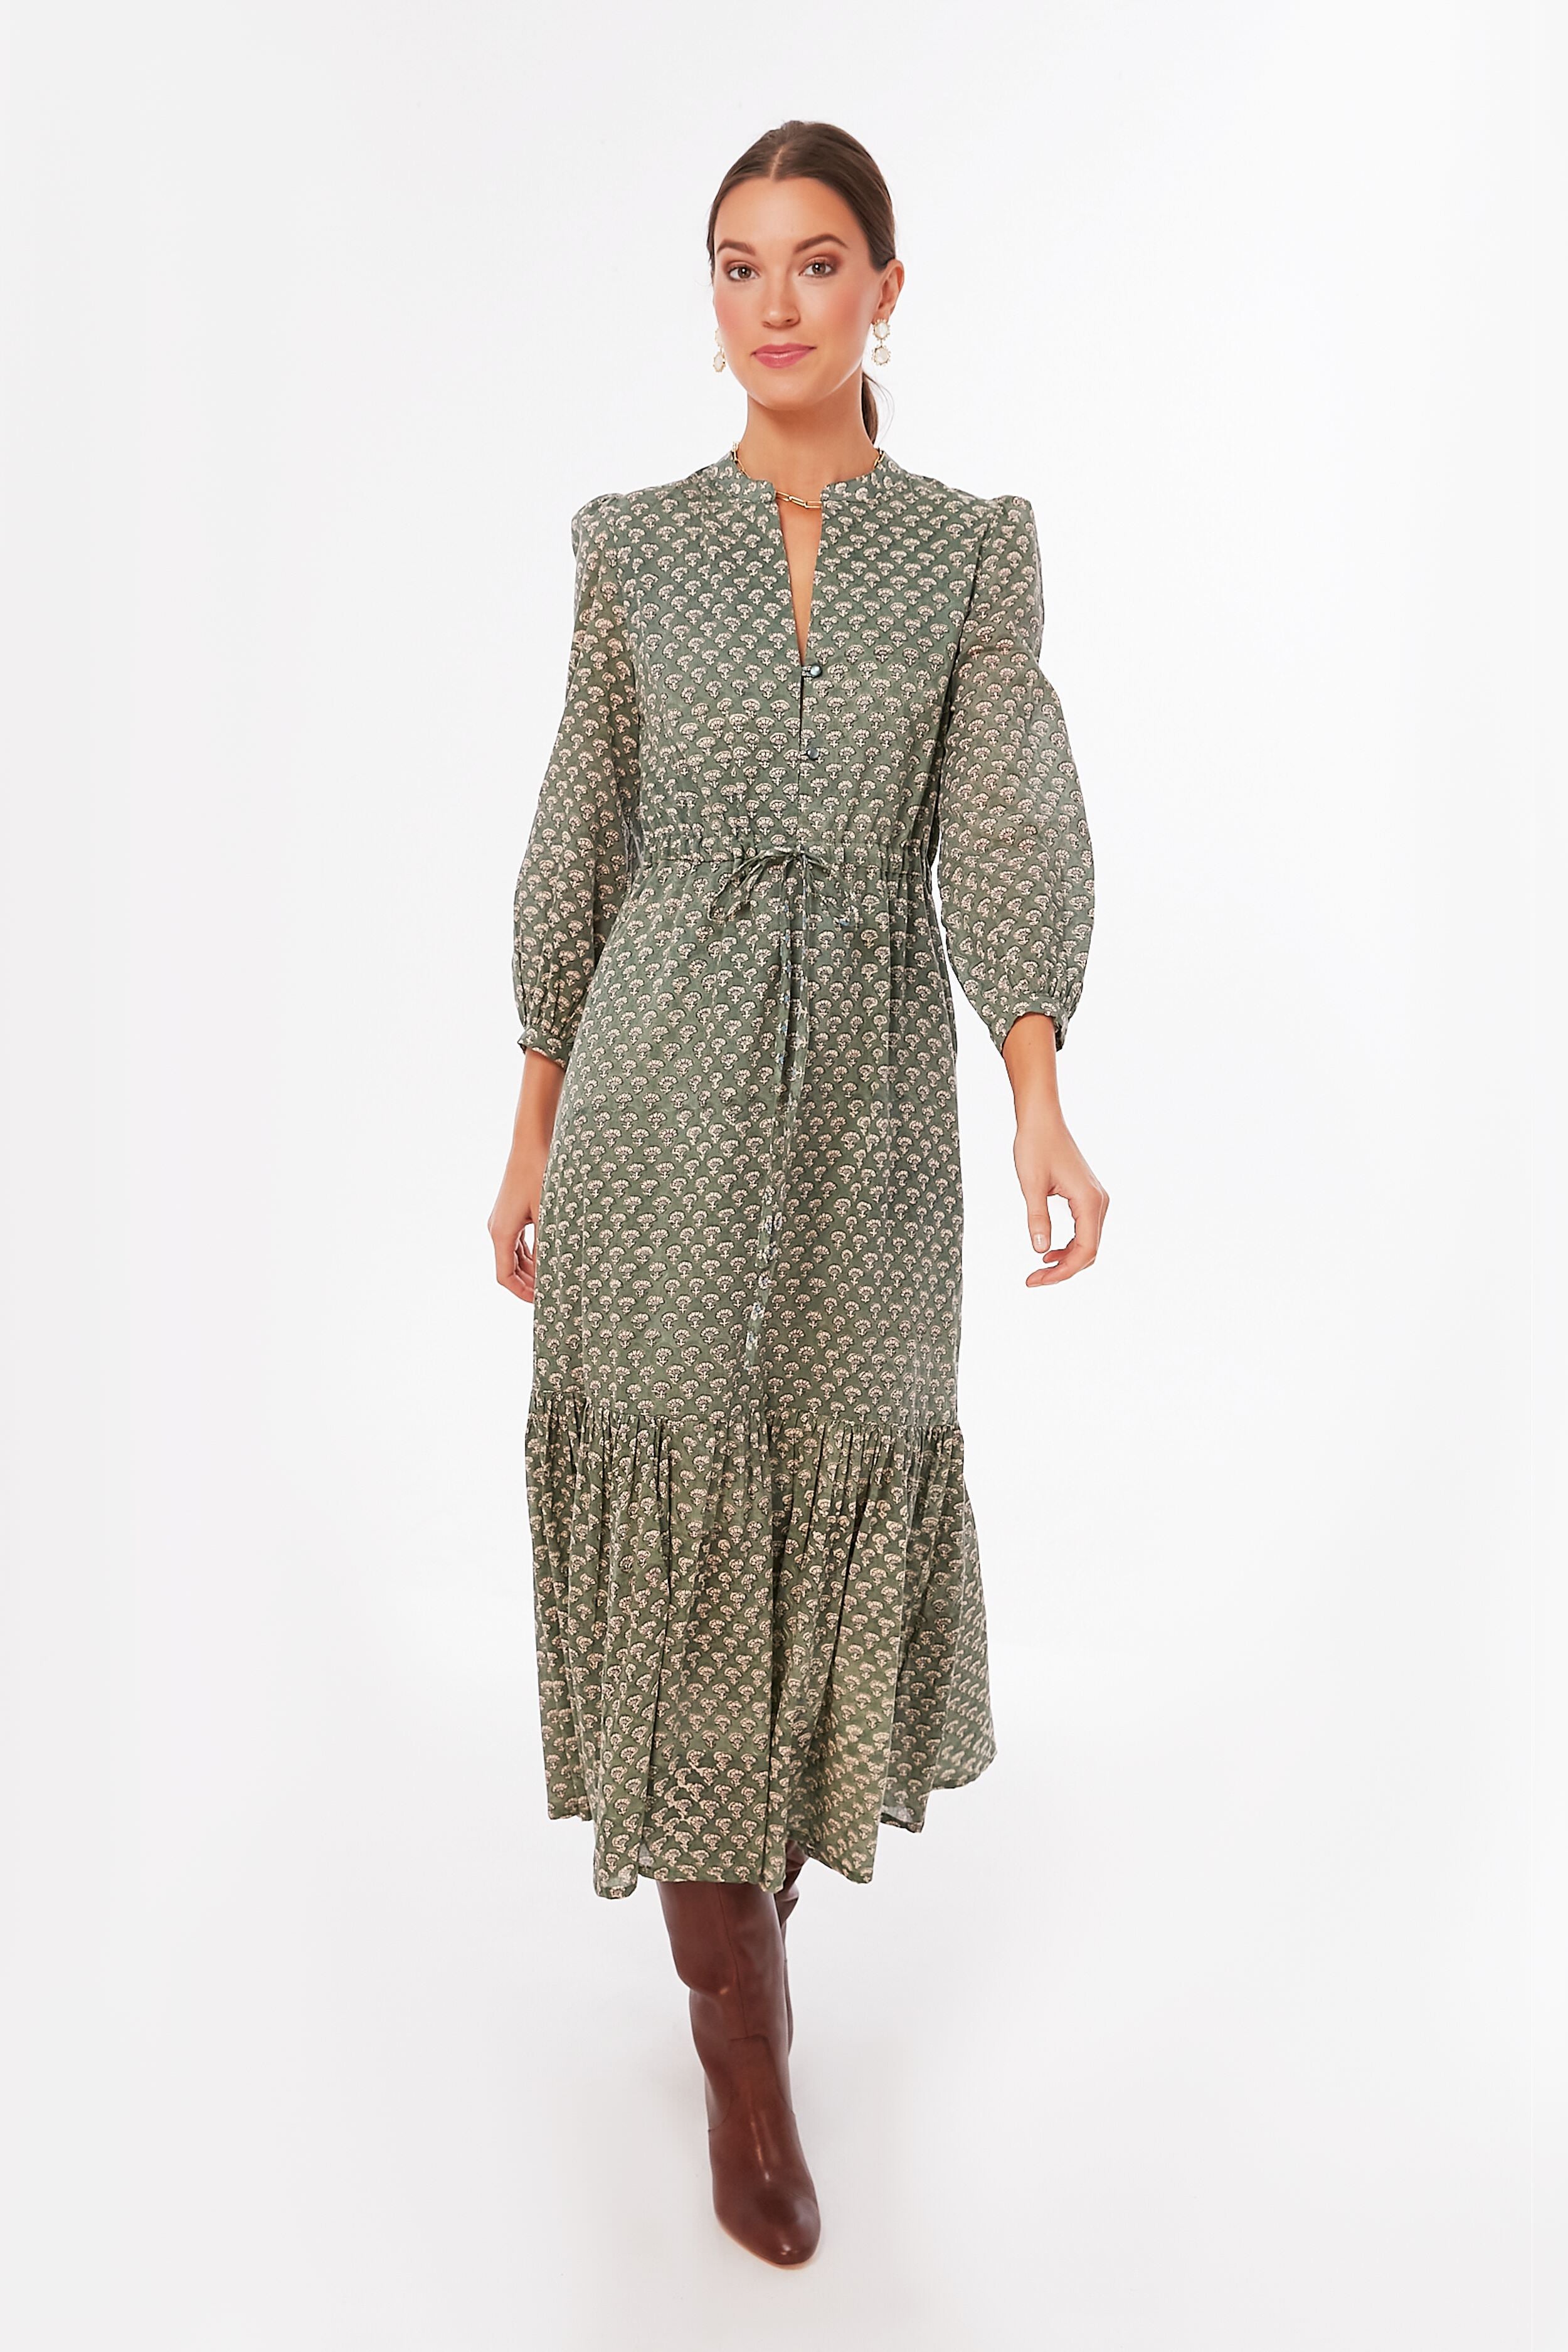 Day Flowers Juniper Frances 2 Dress | India Collection by Emerson Fry